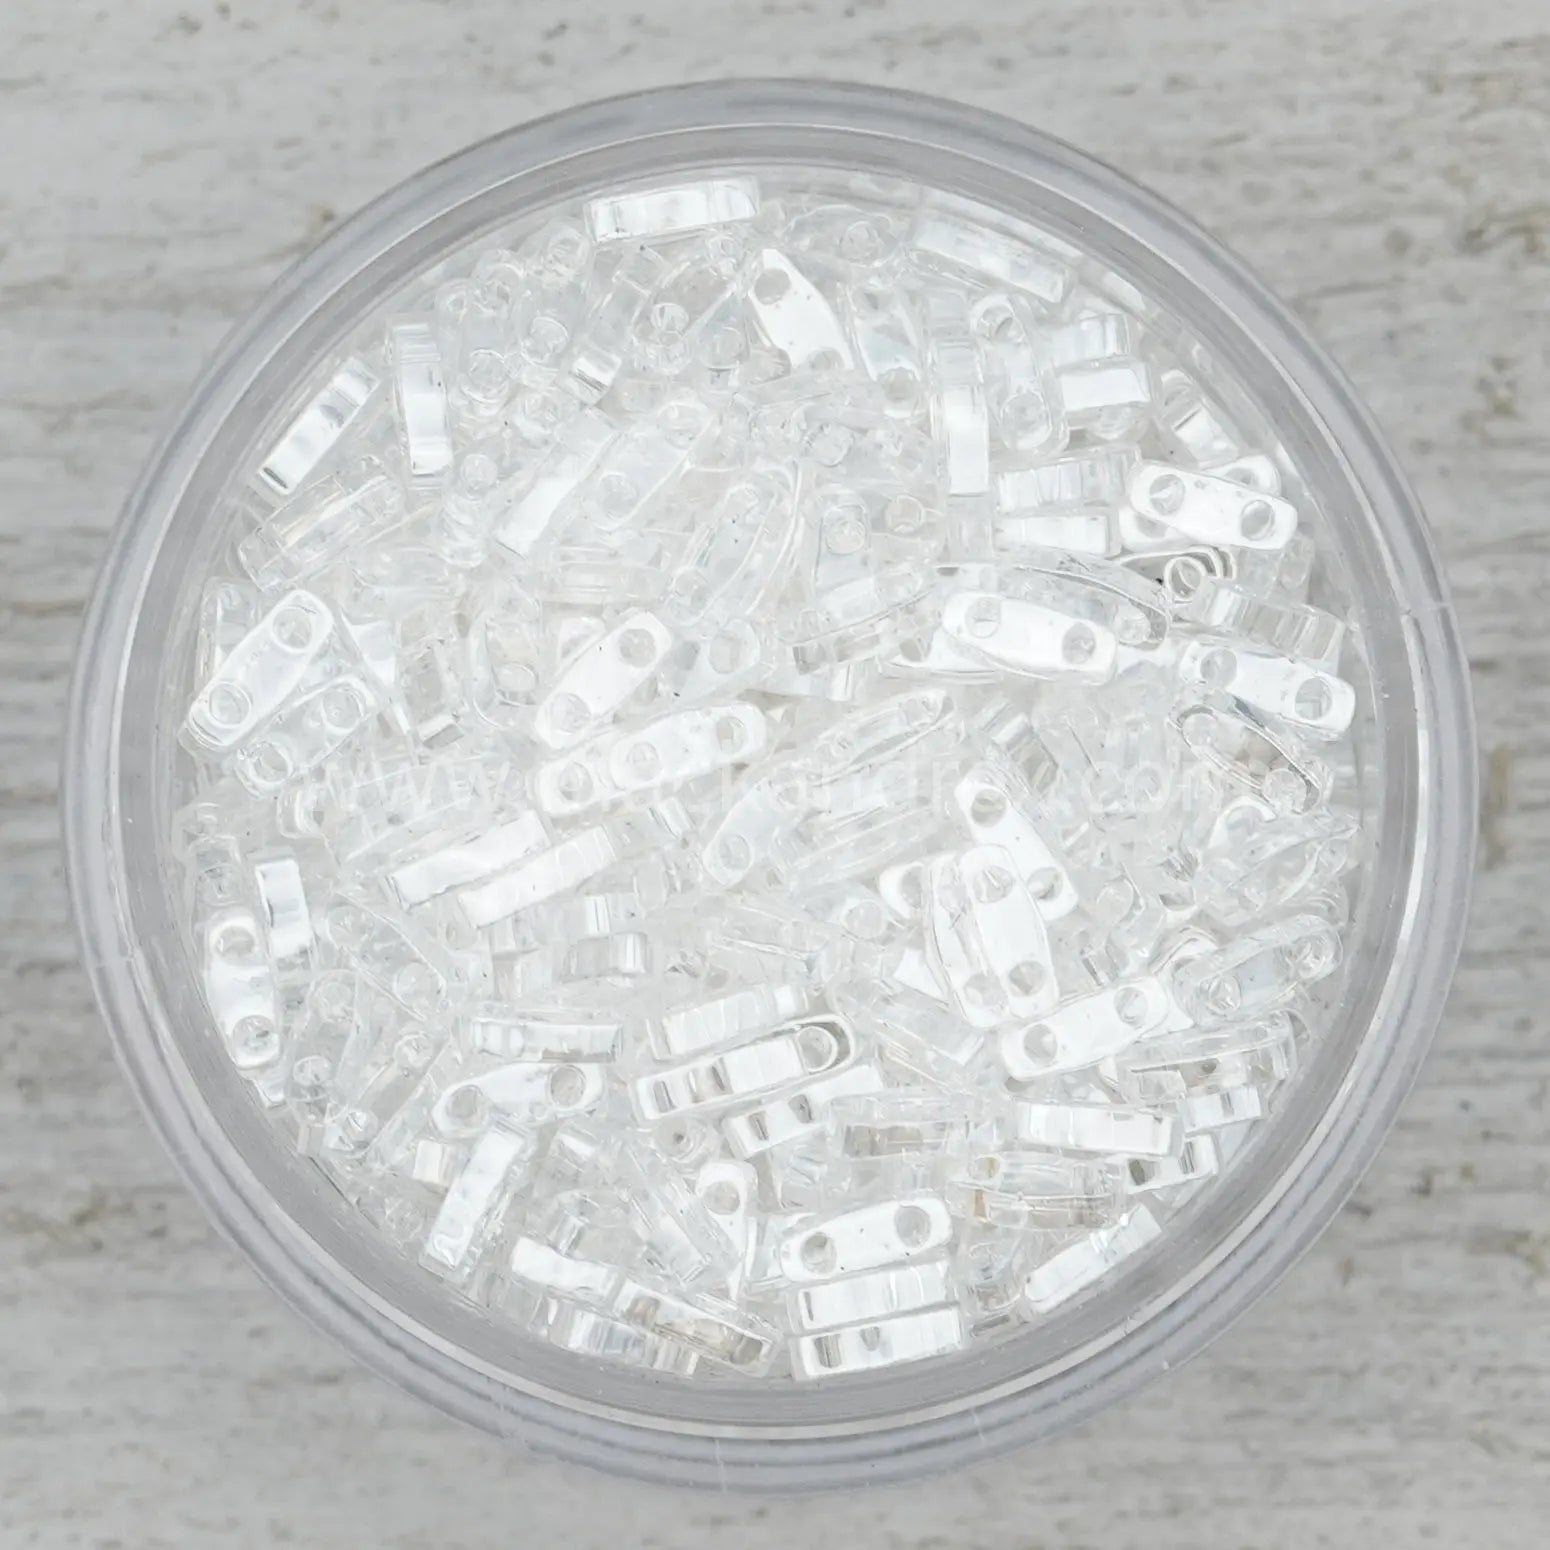 a plastic container filled with lots of white beads